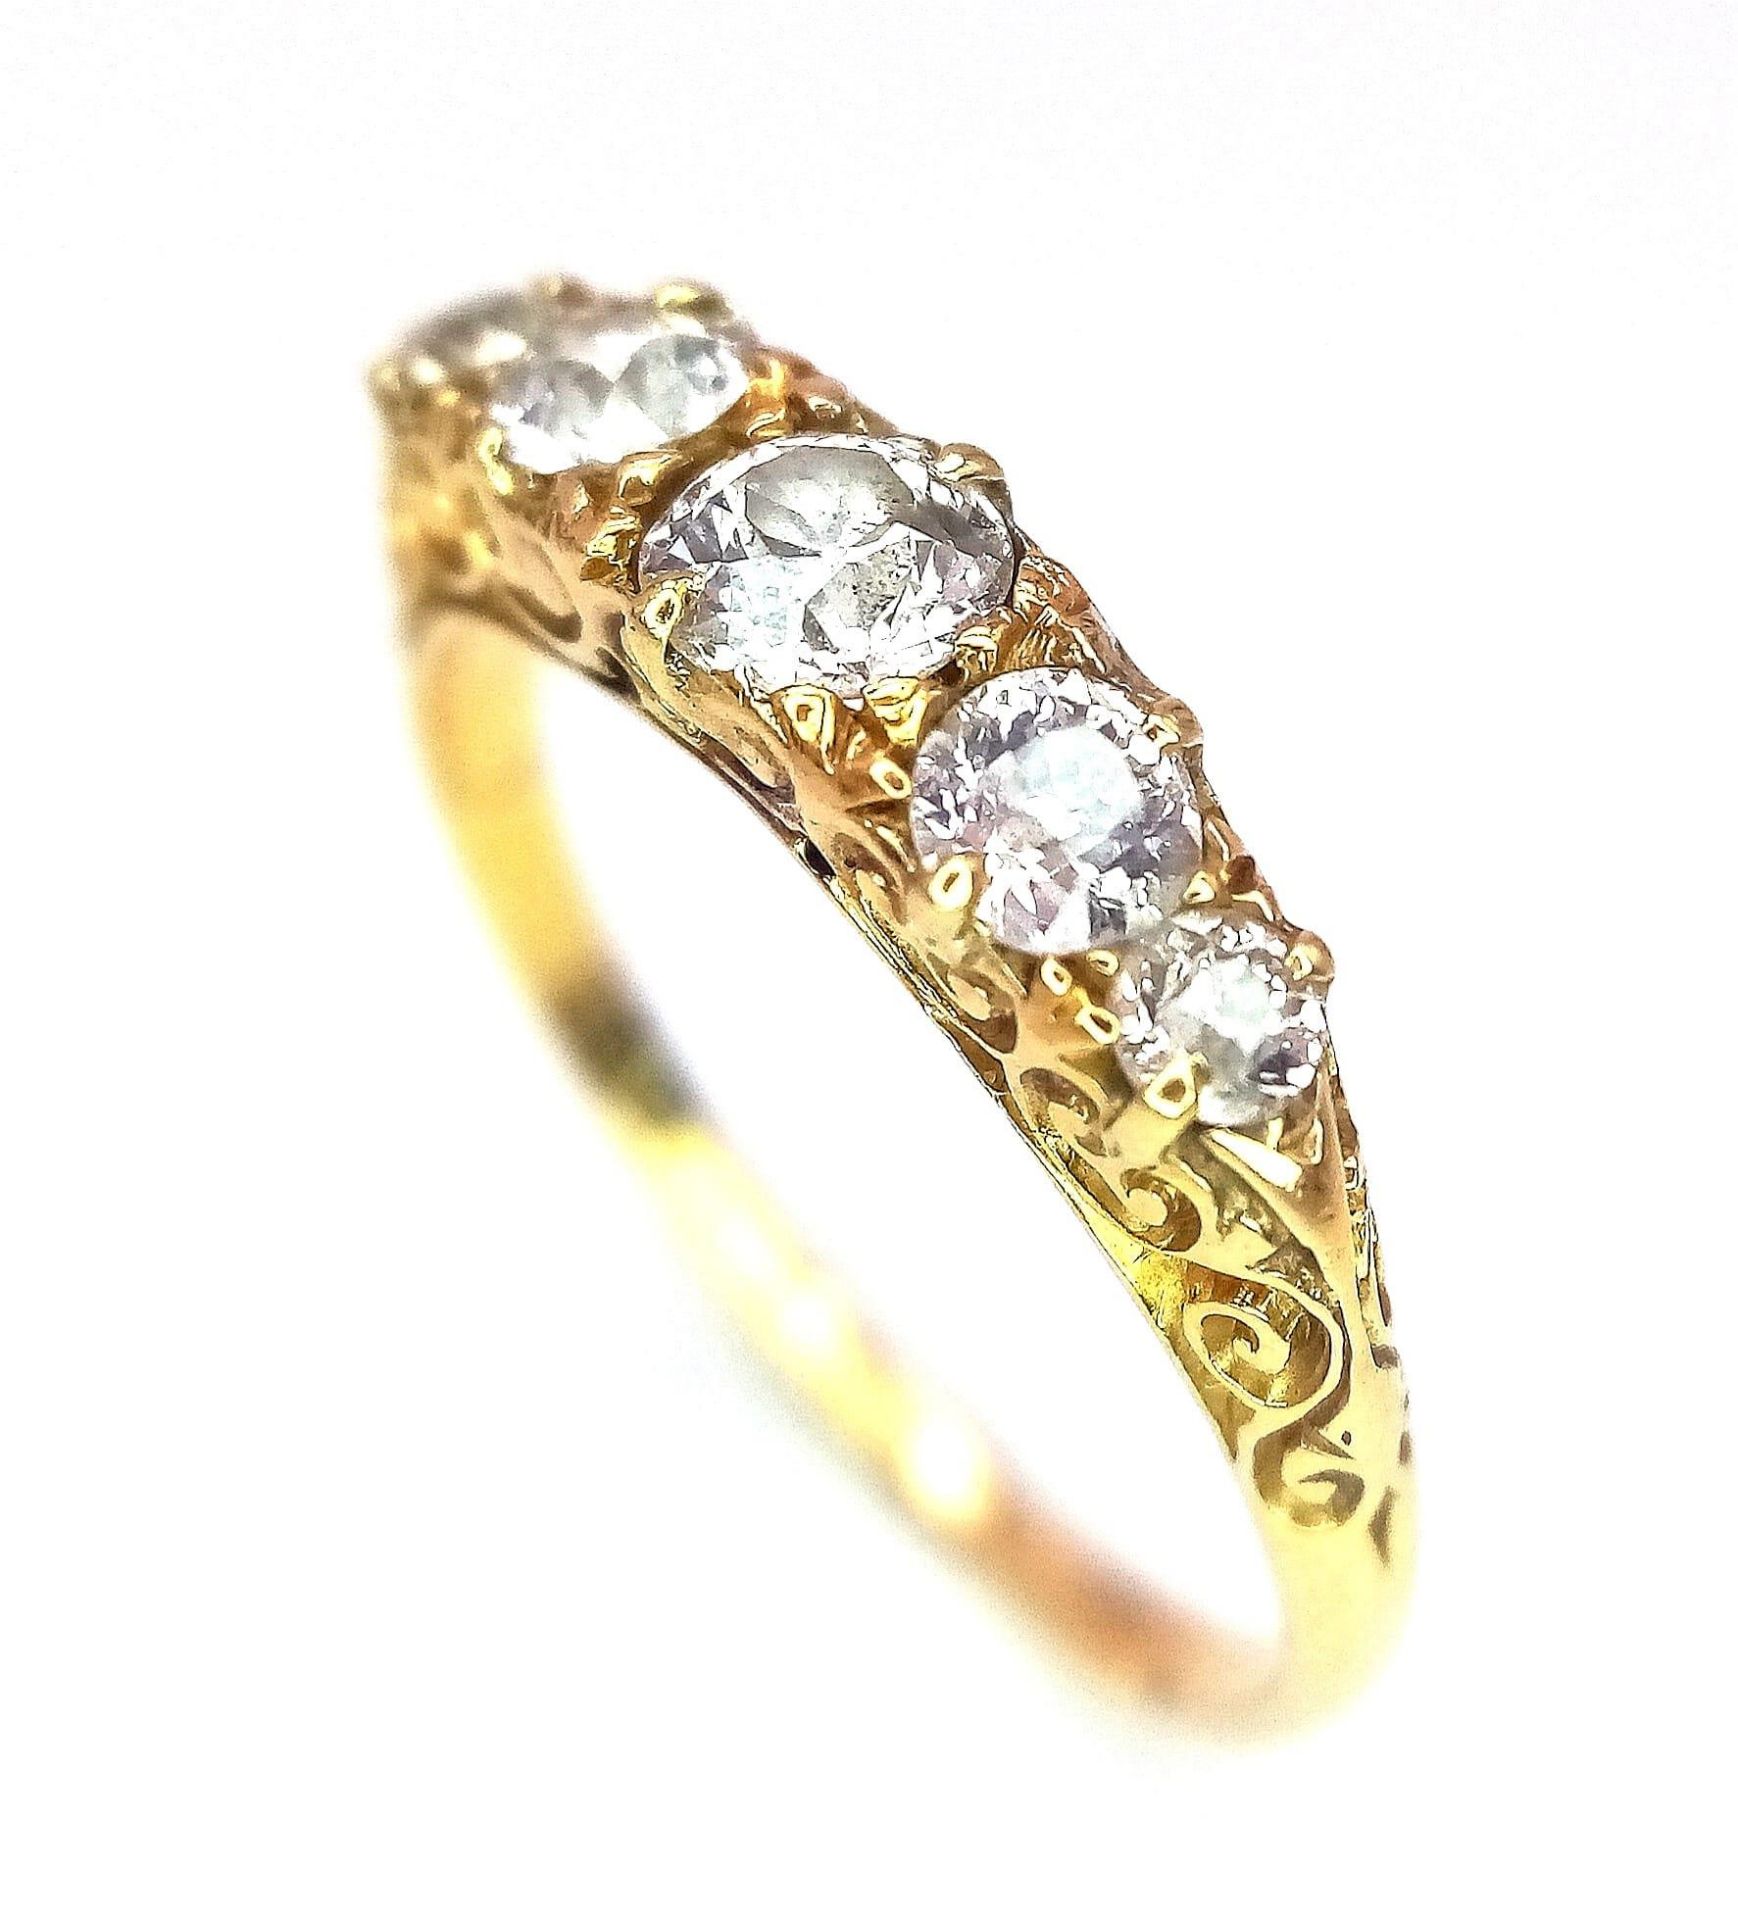 AN ANTIQUE 18K YELOW GOLD DIAMOND 5 STONE SET RING, WITH APPROX 0.60CT OLD CUT DIAMONDS, WEIGHT 2.5G - Image 3 of 13